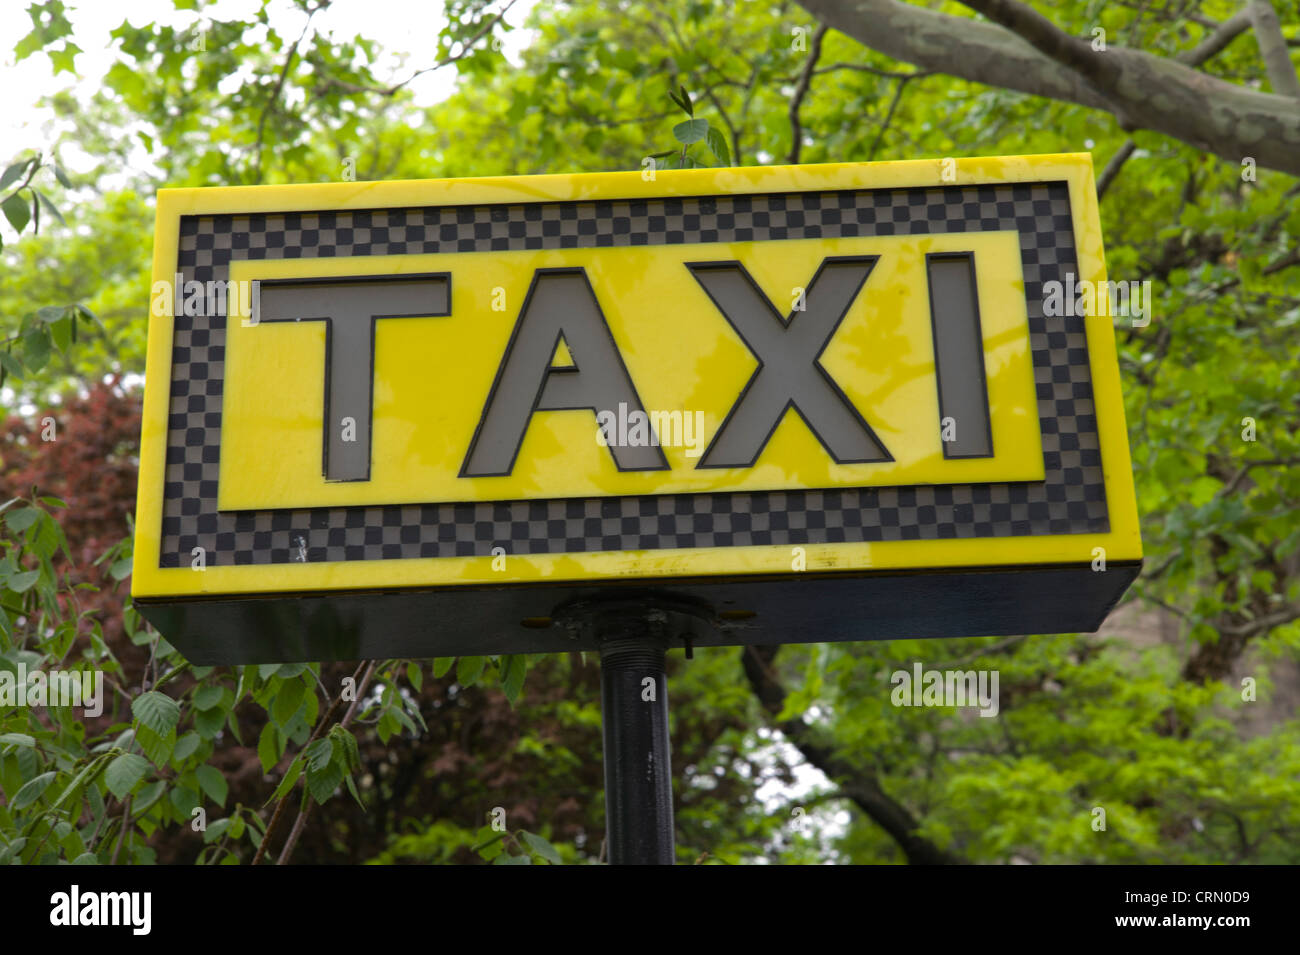 Taxi stand sign Stock Photo